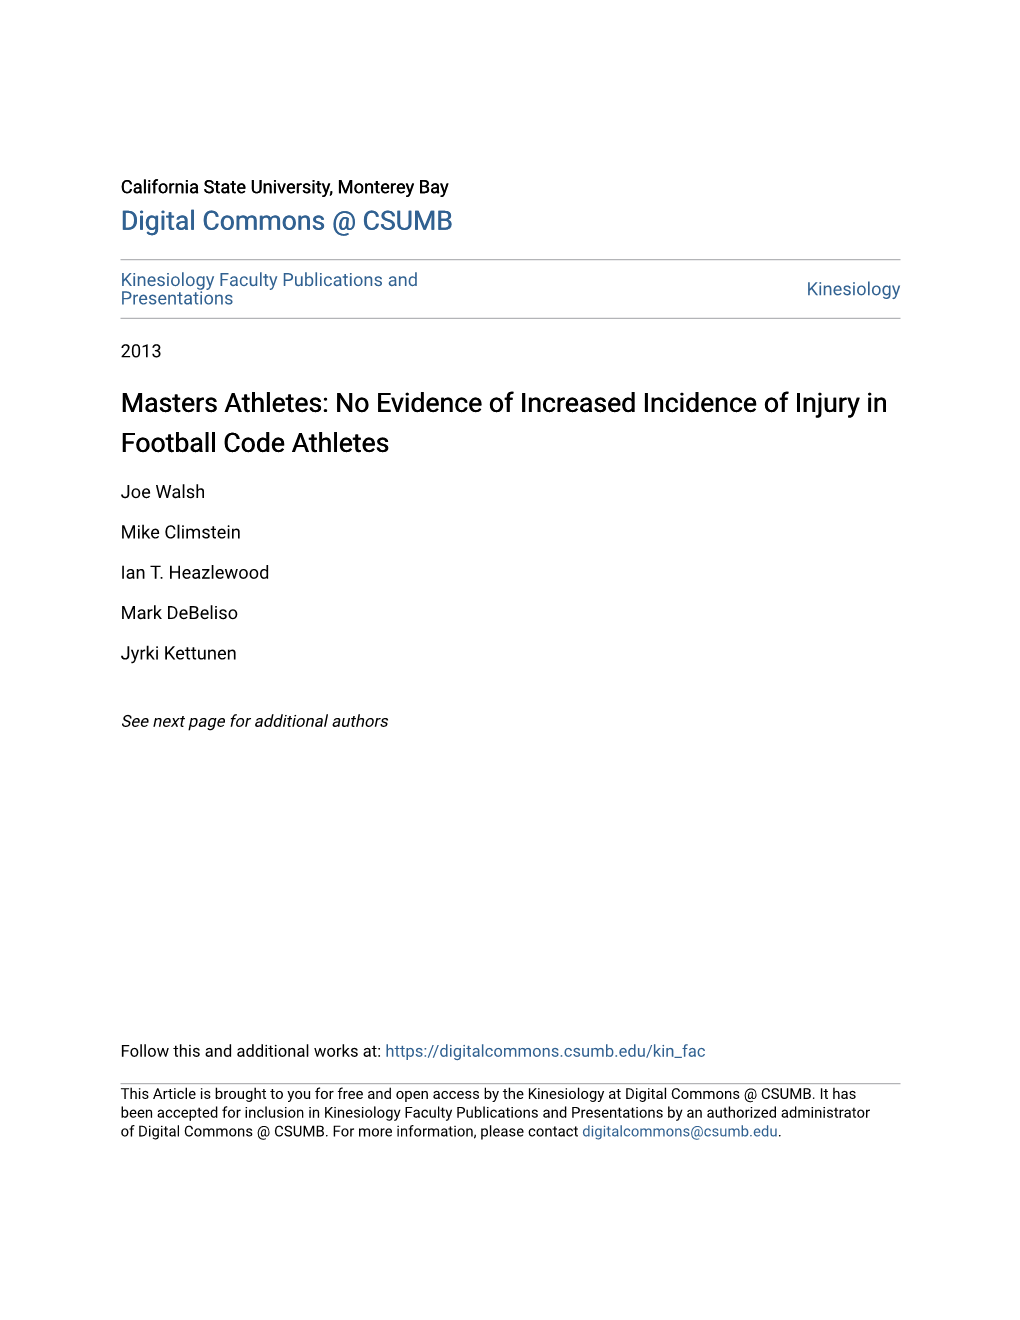 Masters Athletes: No Evidence of Increased Incidence of Injury in Football Code Athletes